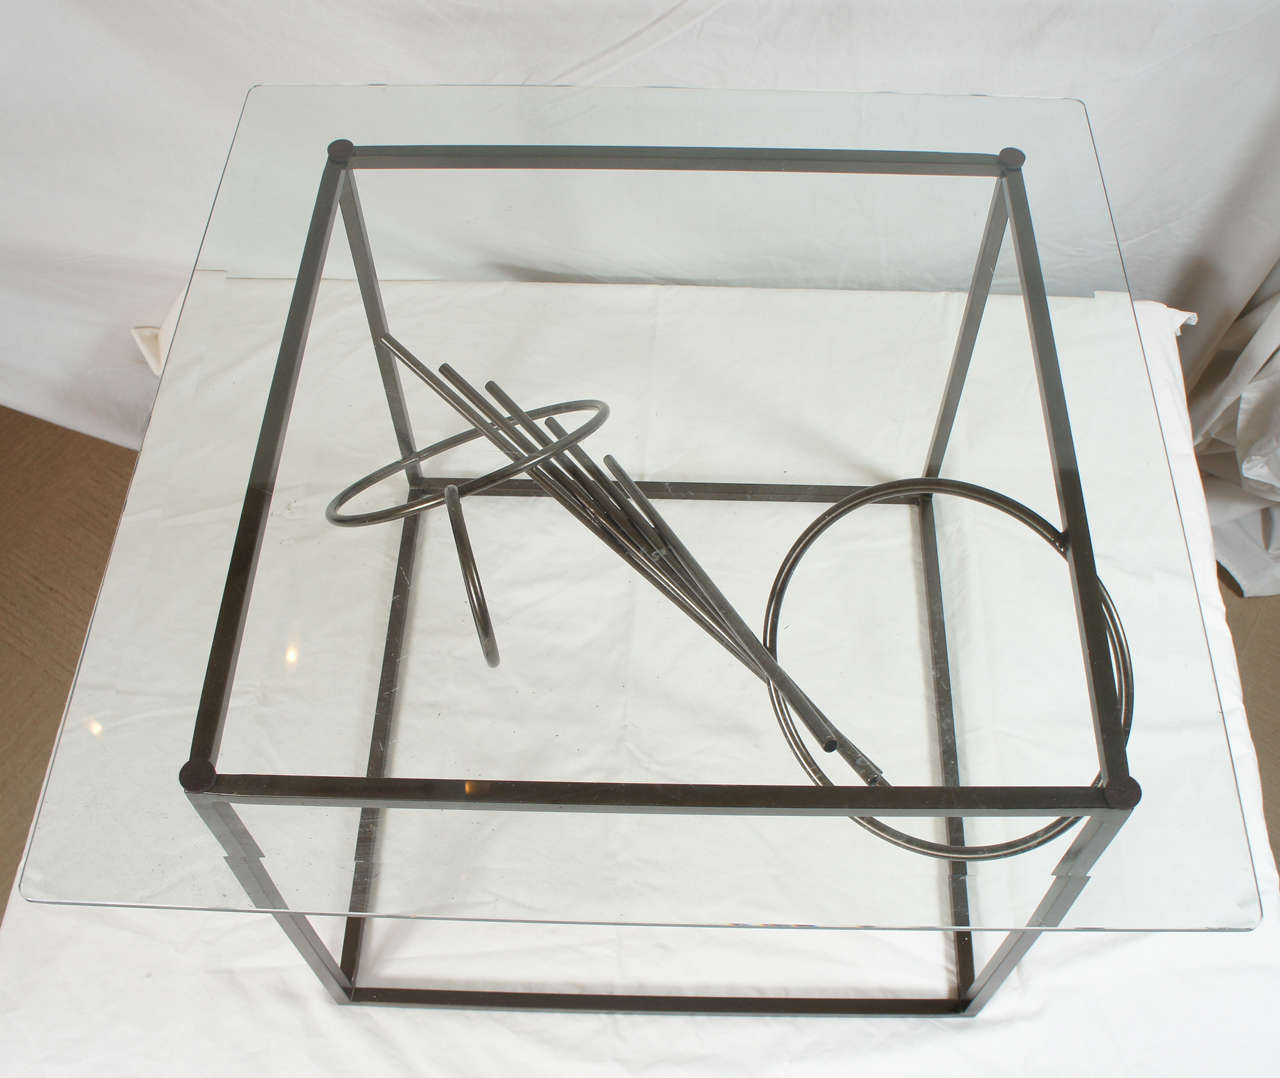 Powder-Coated Original Custom-Made in America, One of a Kind Sculptural Table by Lou Blass For Sale